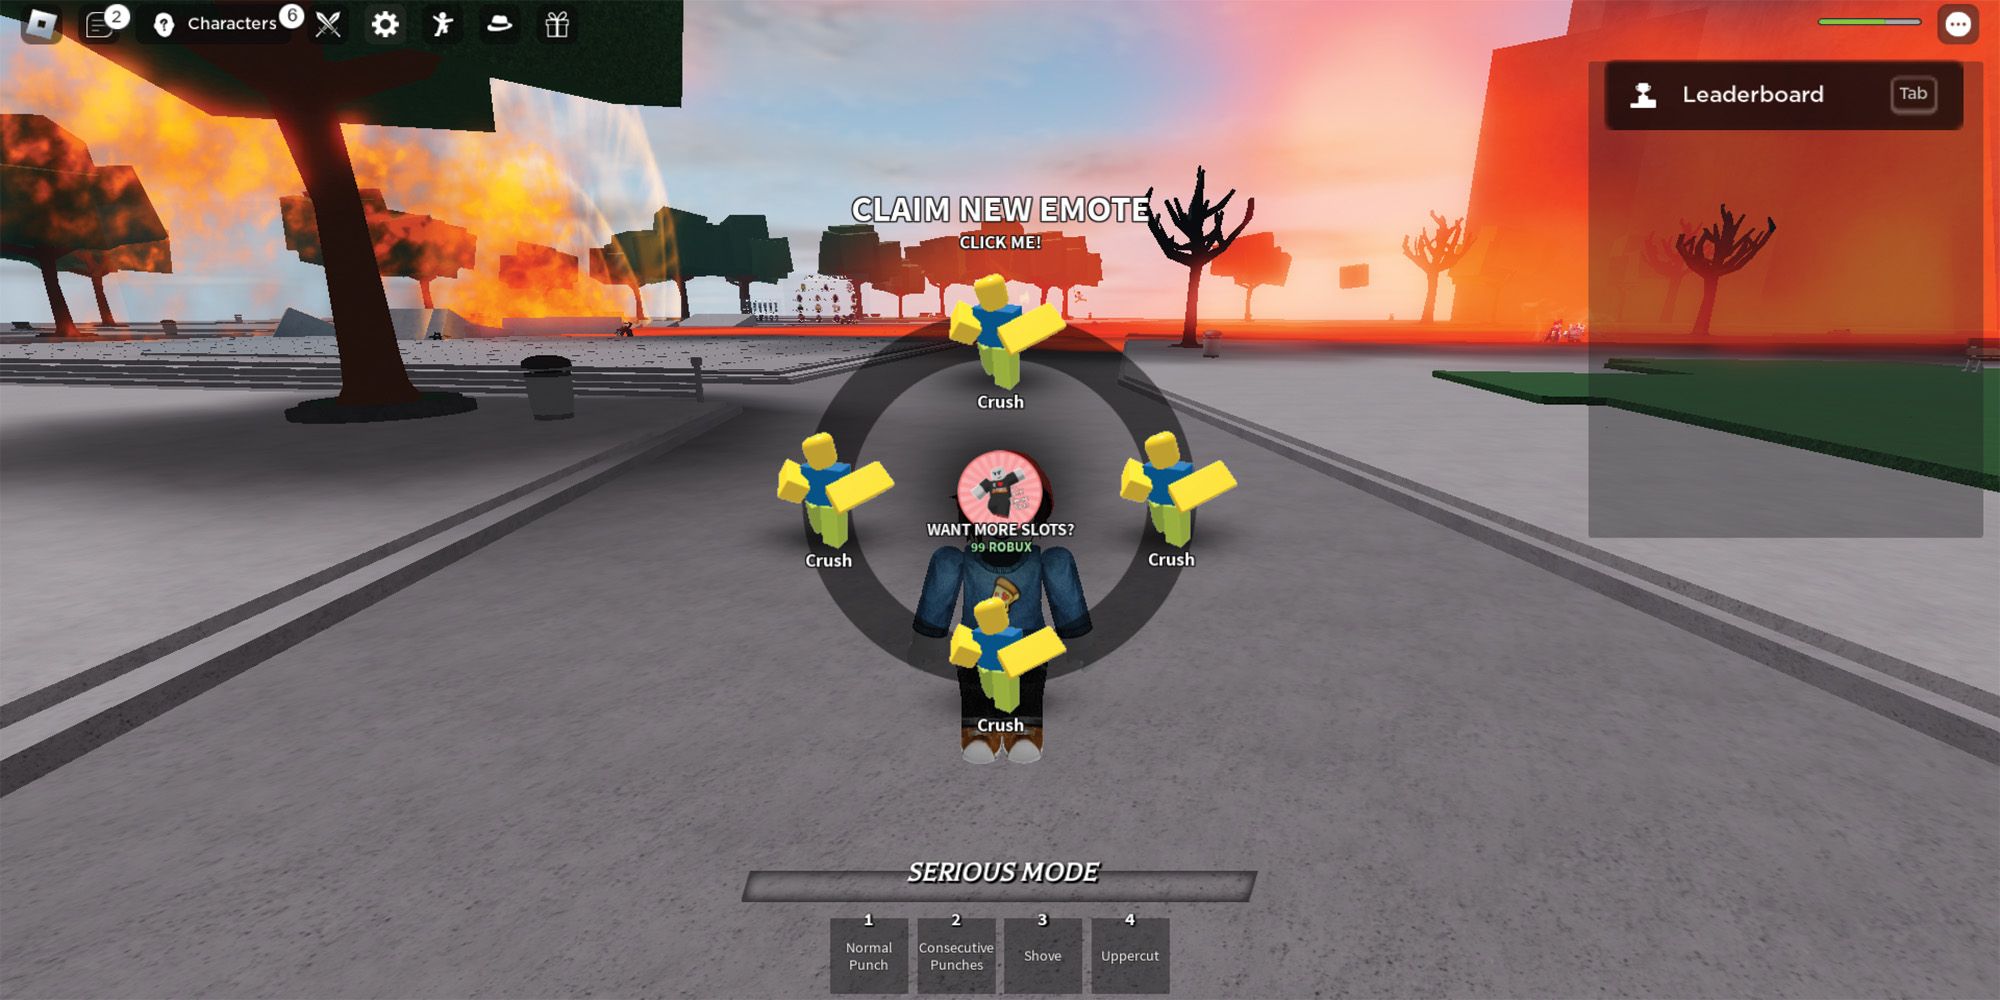 How To Get Emotes In Roblox: The Strongest Battlegrounds